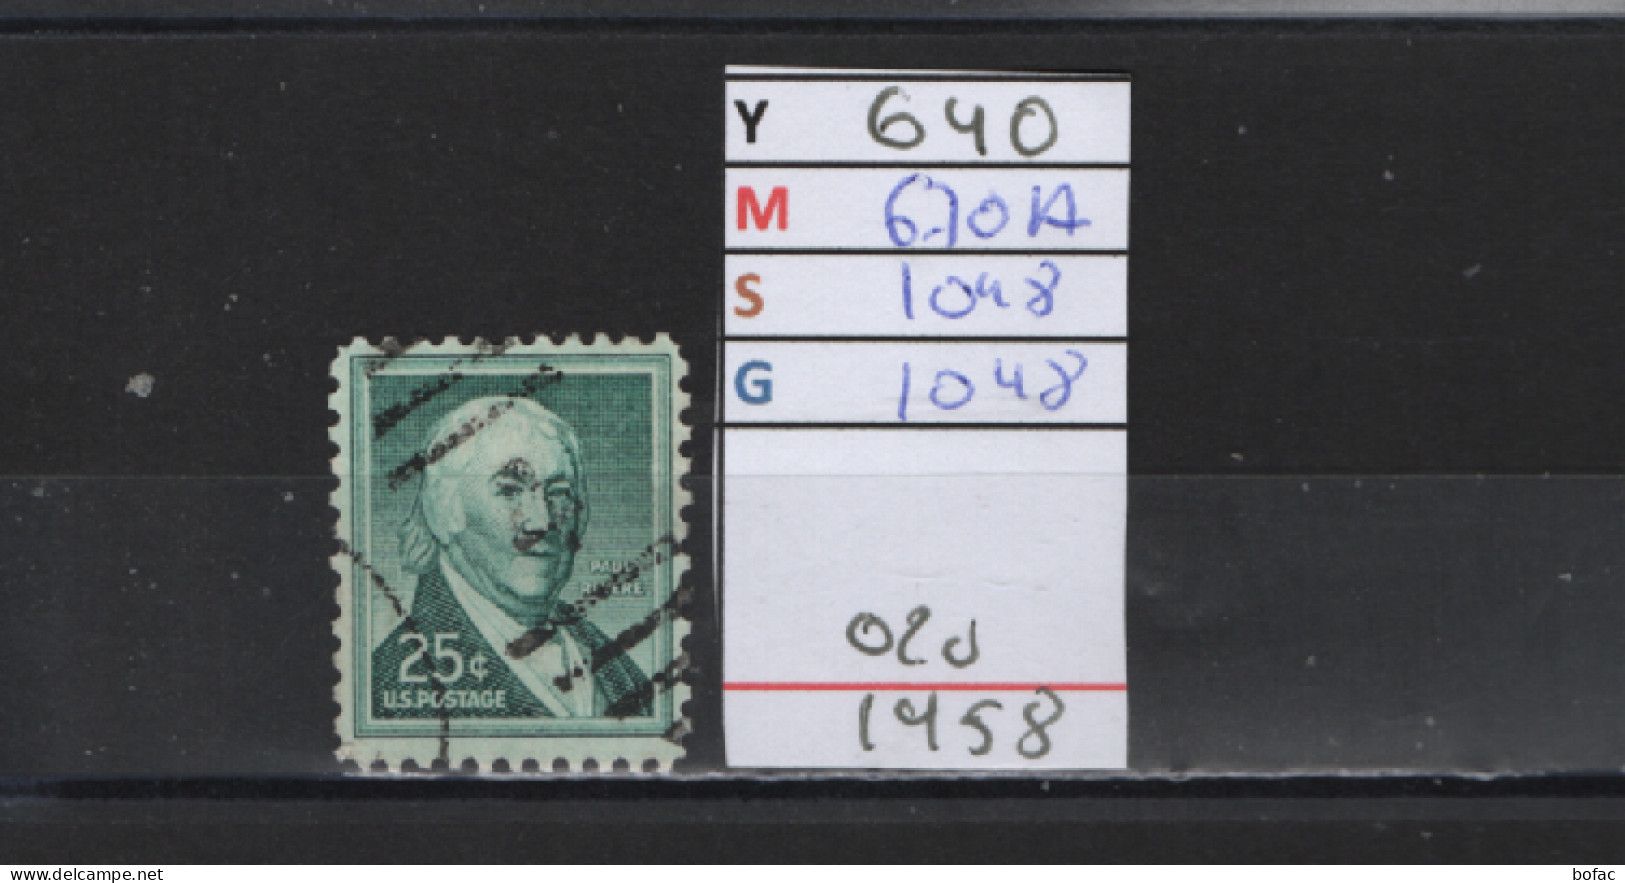 PRIX FIXE Obl  640 YT 670A MIC 1048 SCO 1048 GIB Paul Revere 1958  58A/07 - Used Stamps